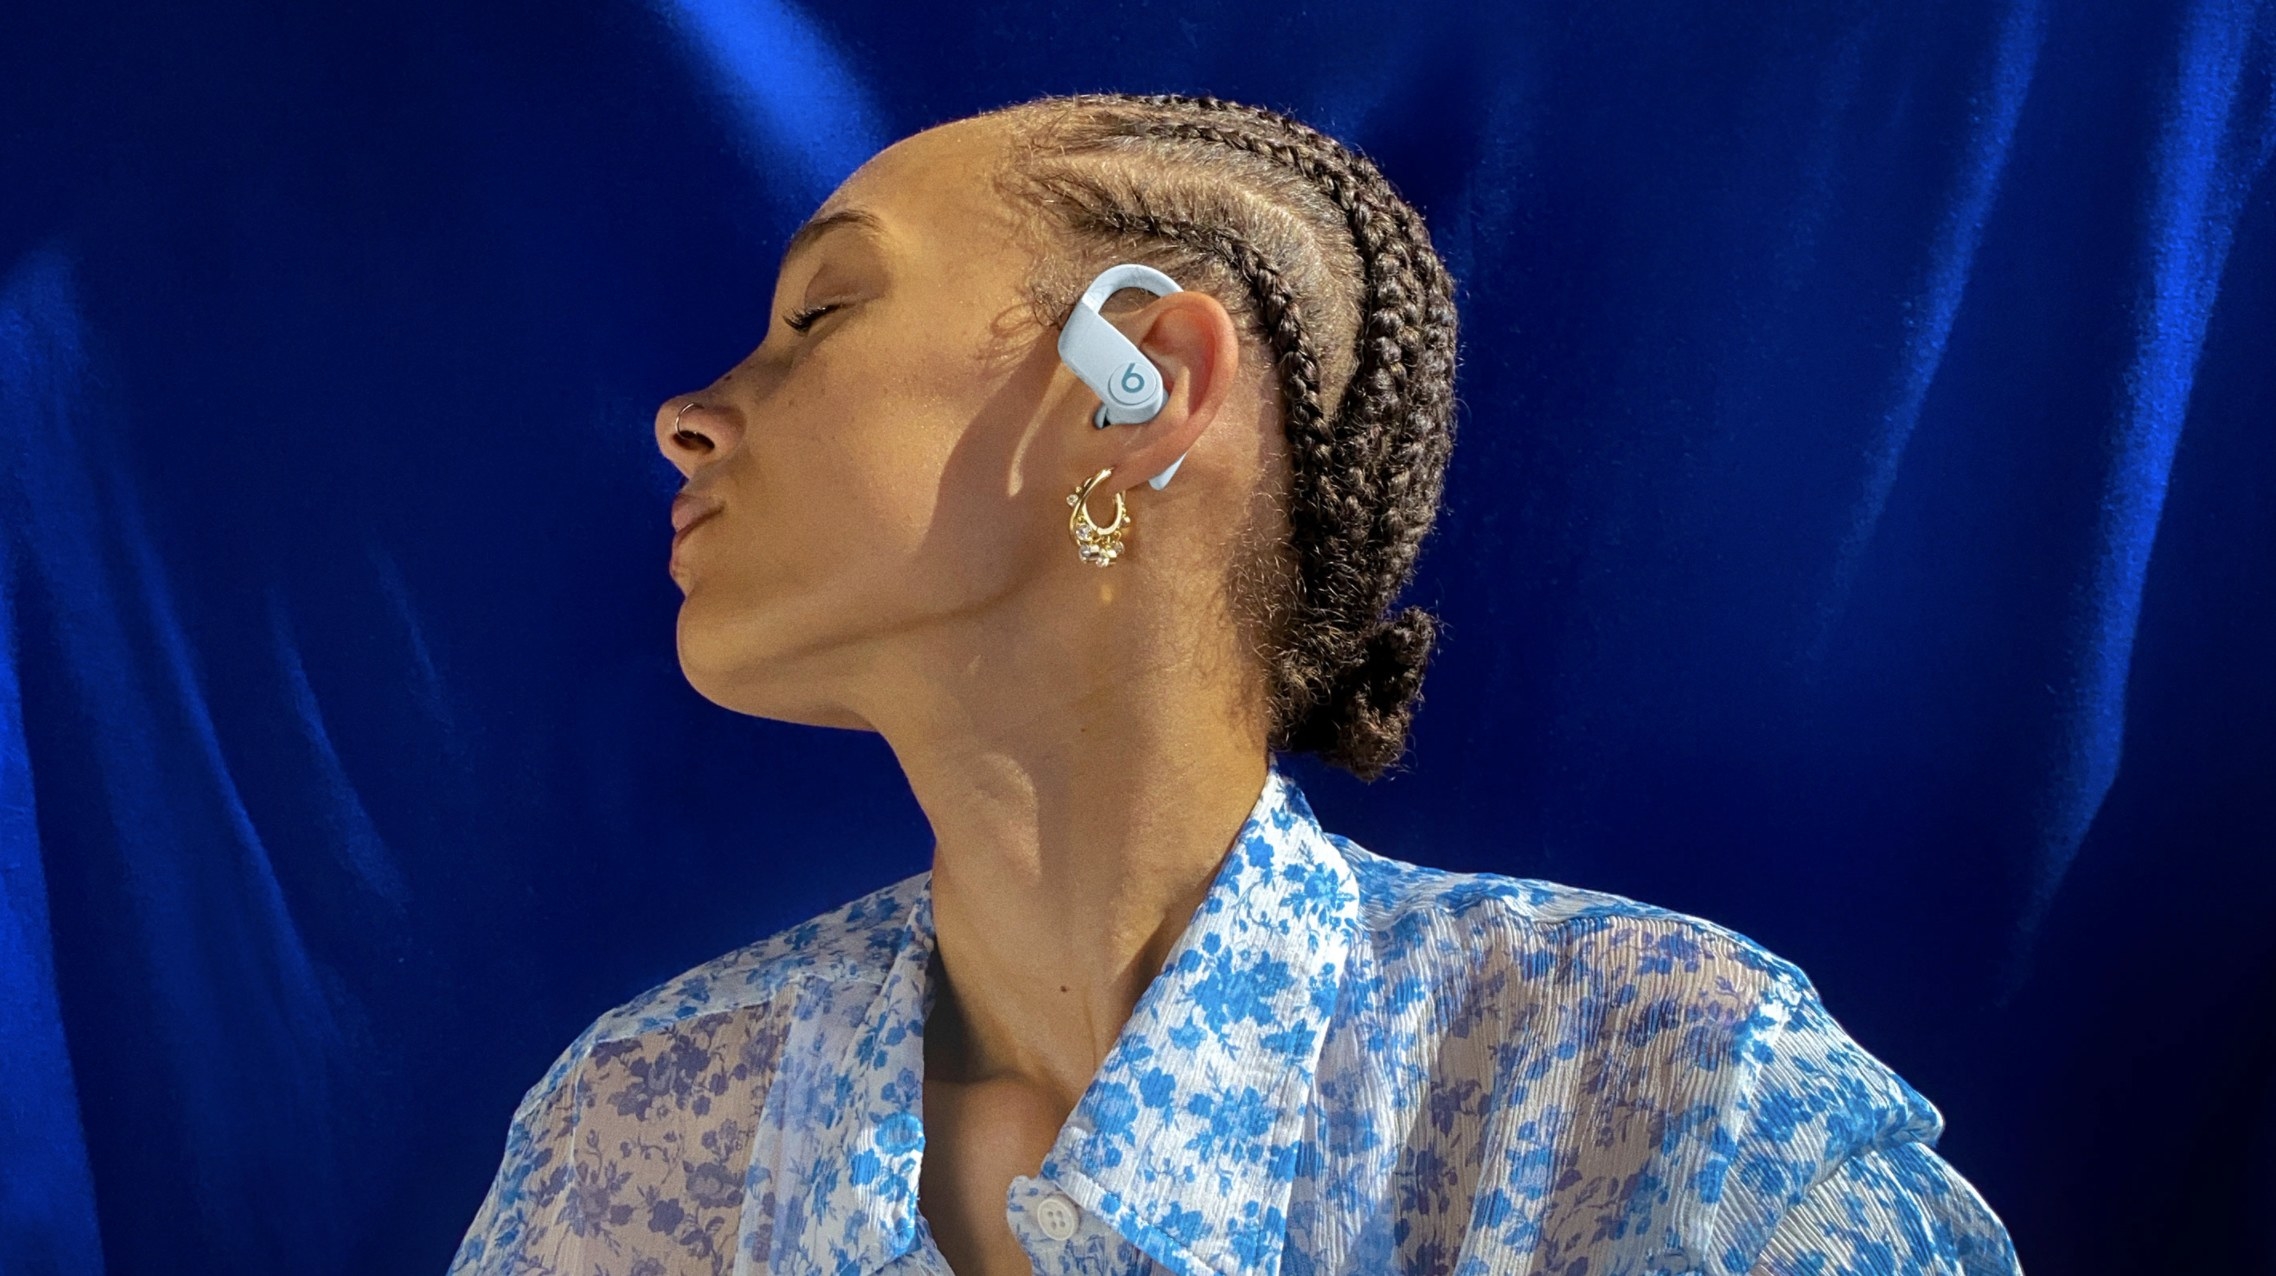 A model with a pair of white Beats wireless headphones in their ears